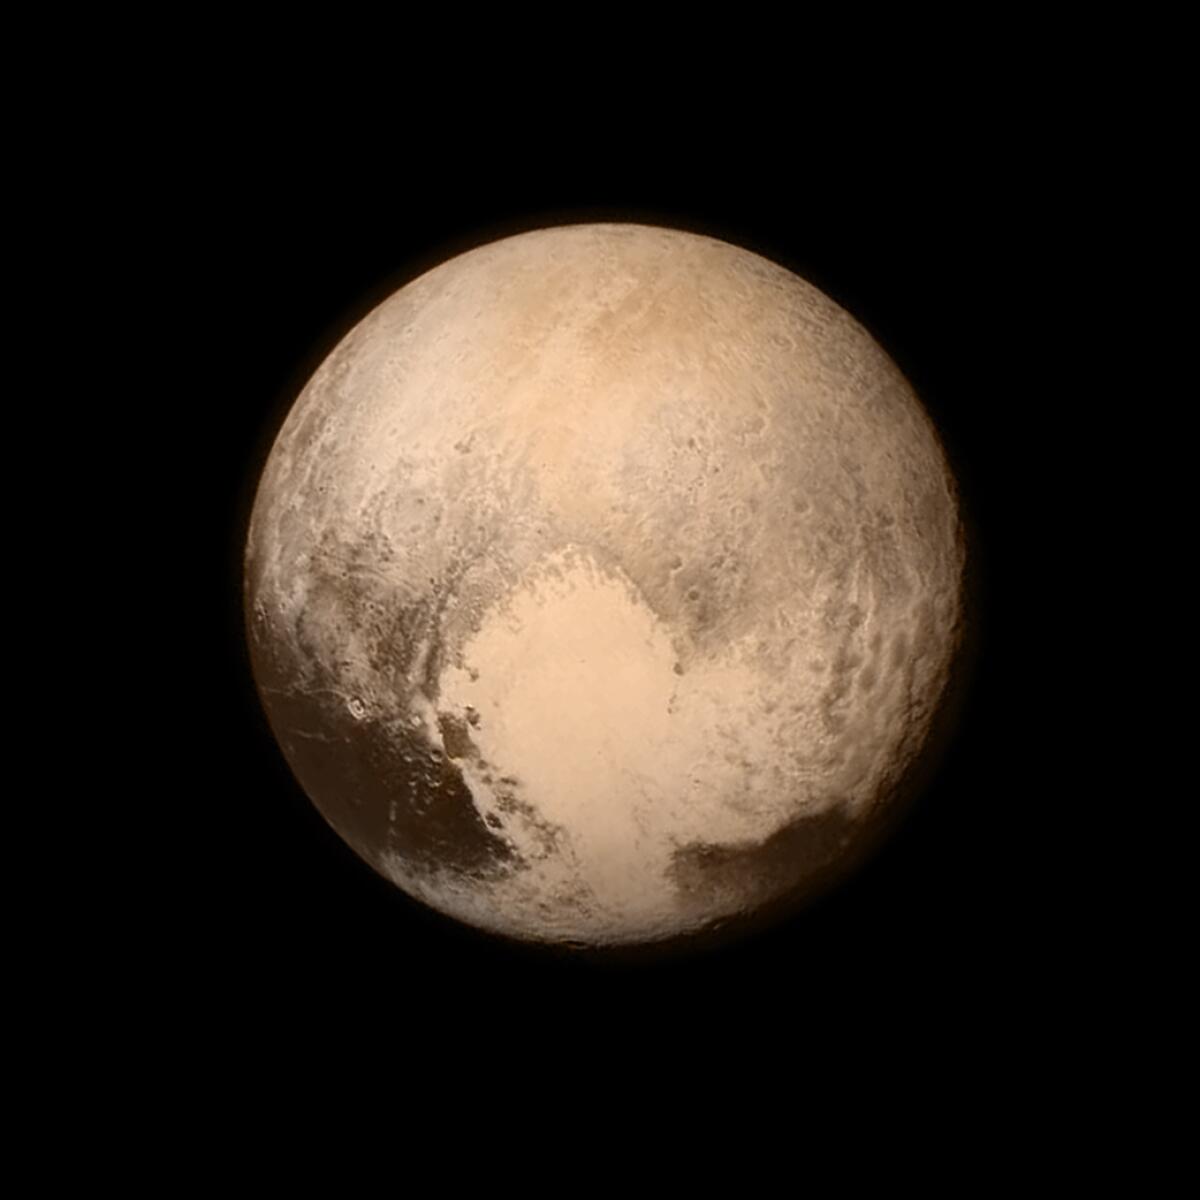 Pluto's "heart" is shown in an image from NASA's New Horizons spacecraft, taken on July 13 when the spacecraft was 476,000 miles from the surface.